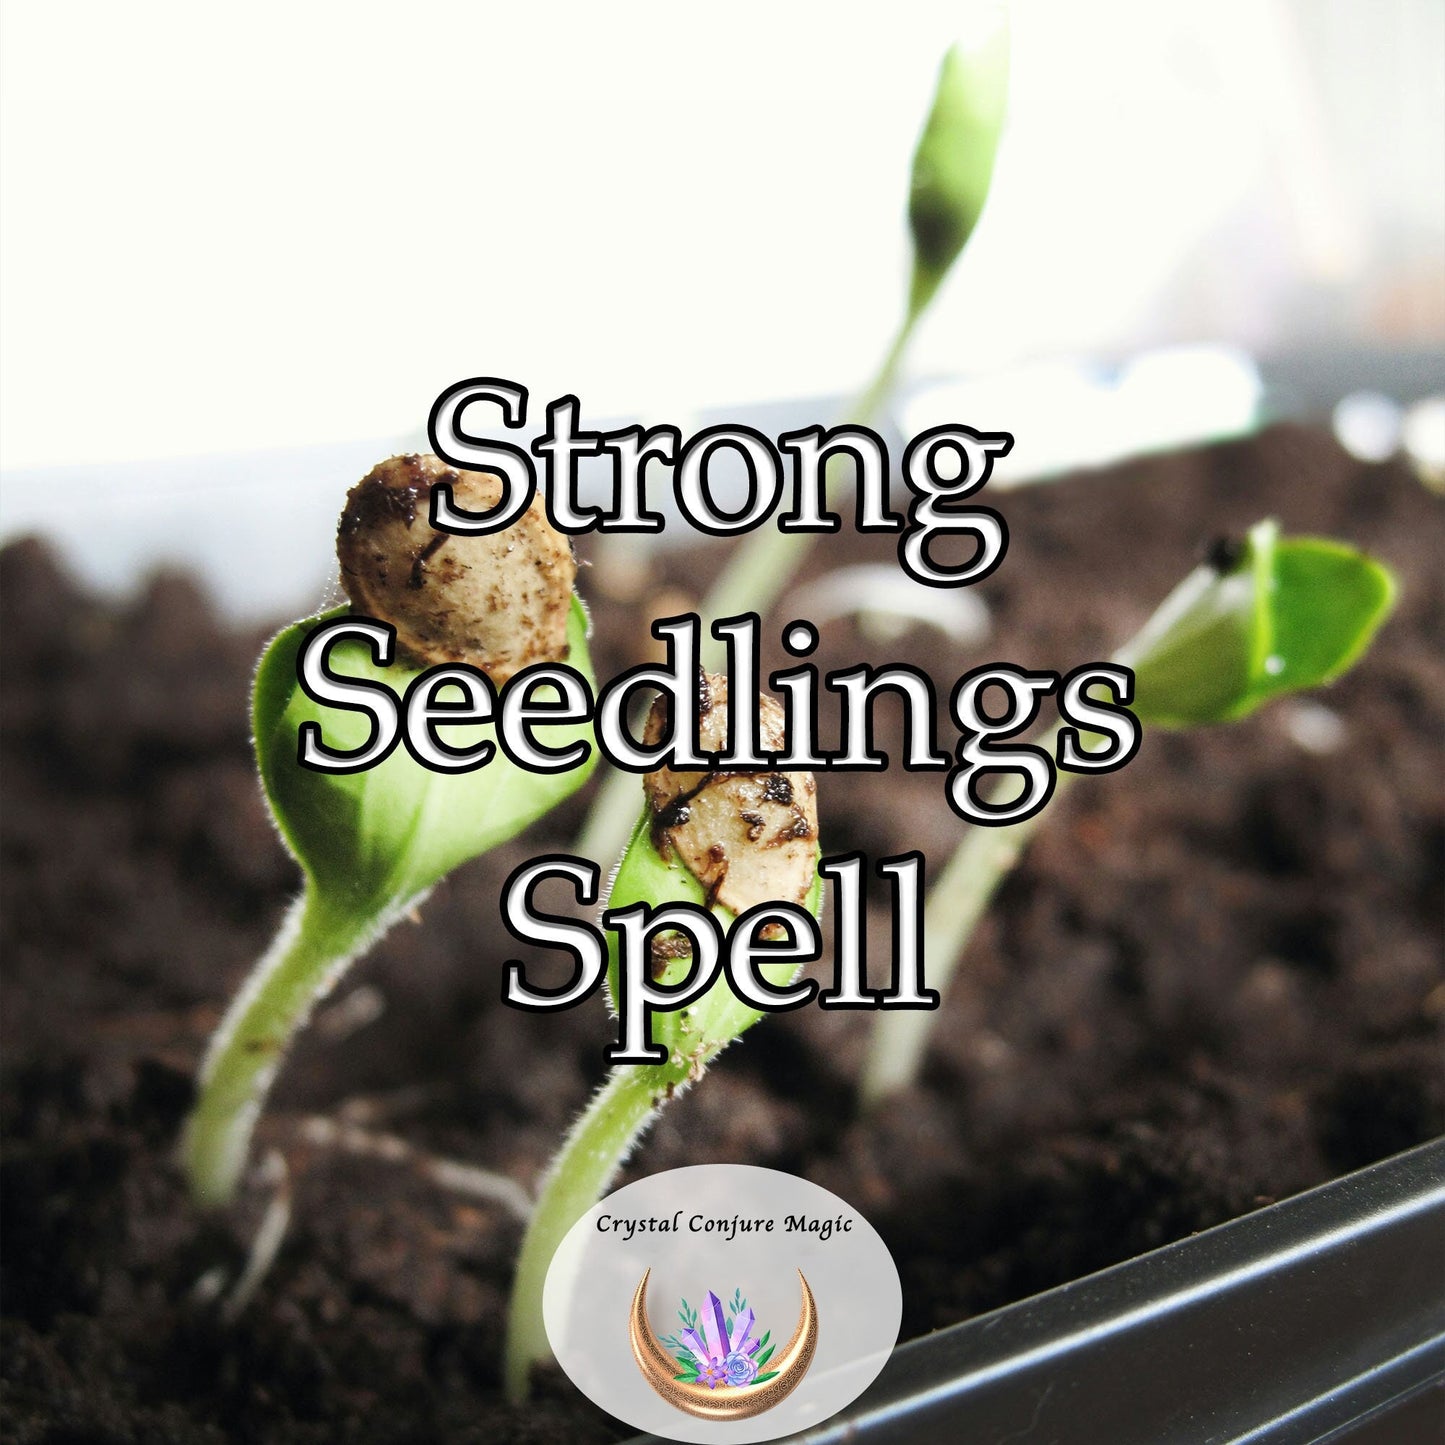 Strong Seedlings Spell - imbue your seedlings with the strength they need to thrive